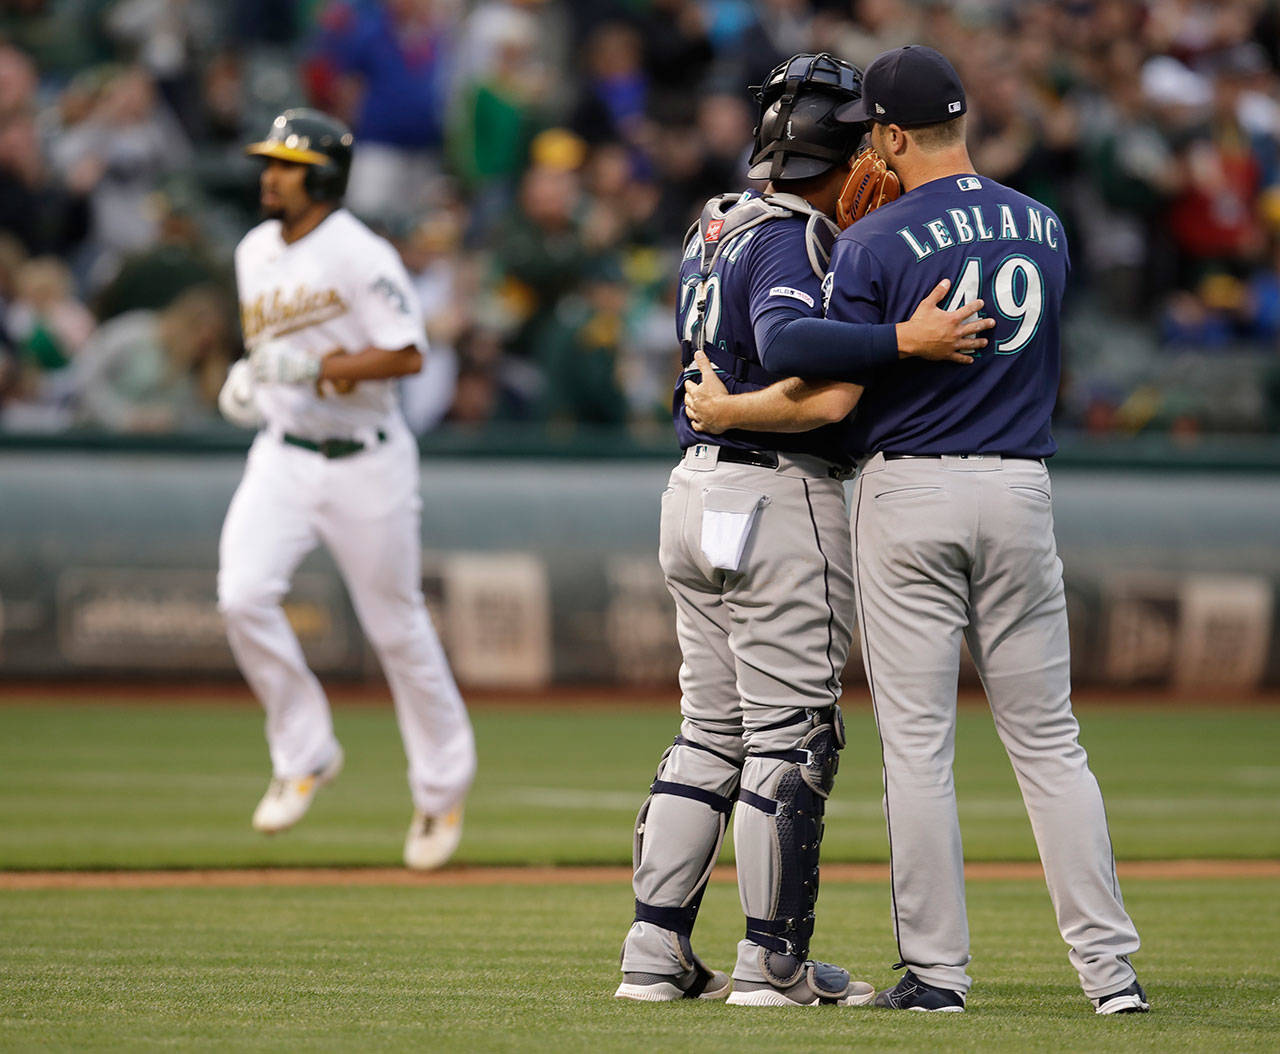 Mariners pitcher Wade LeBlanc (right) speaks with catcher Omar Narvaez as they wait for the Athletics’ Marcus Semien (back left) to run the bases after hitting a home run in the second inning of a game on June 15, 2019, in Oakland, Calif. (AP Photo/Ben Margot)